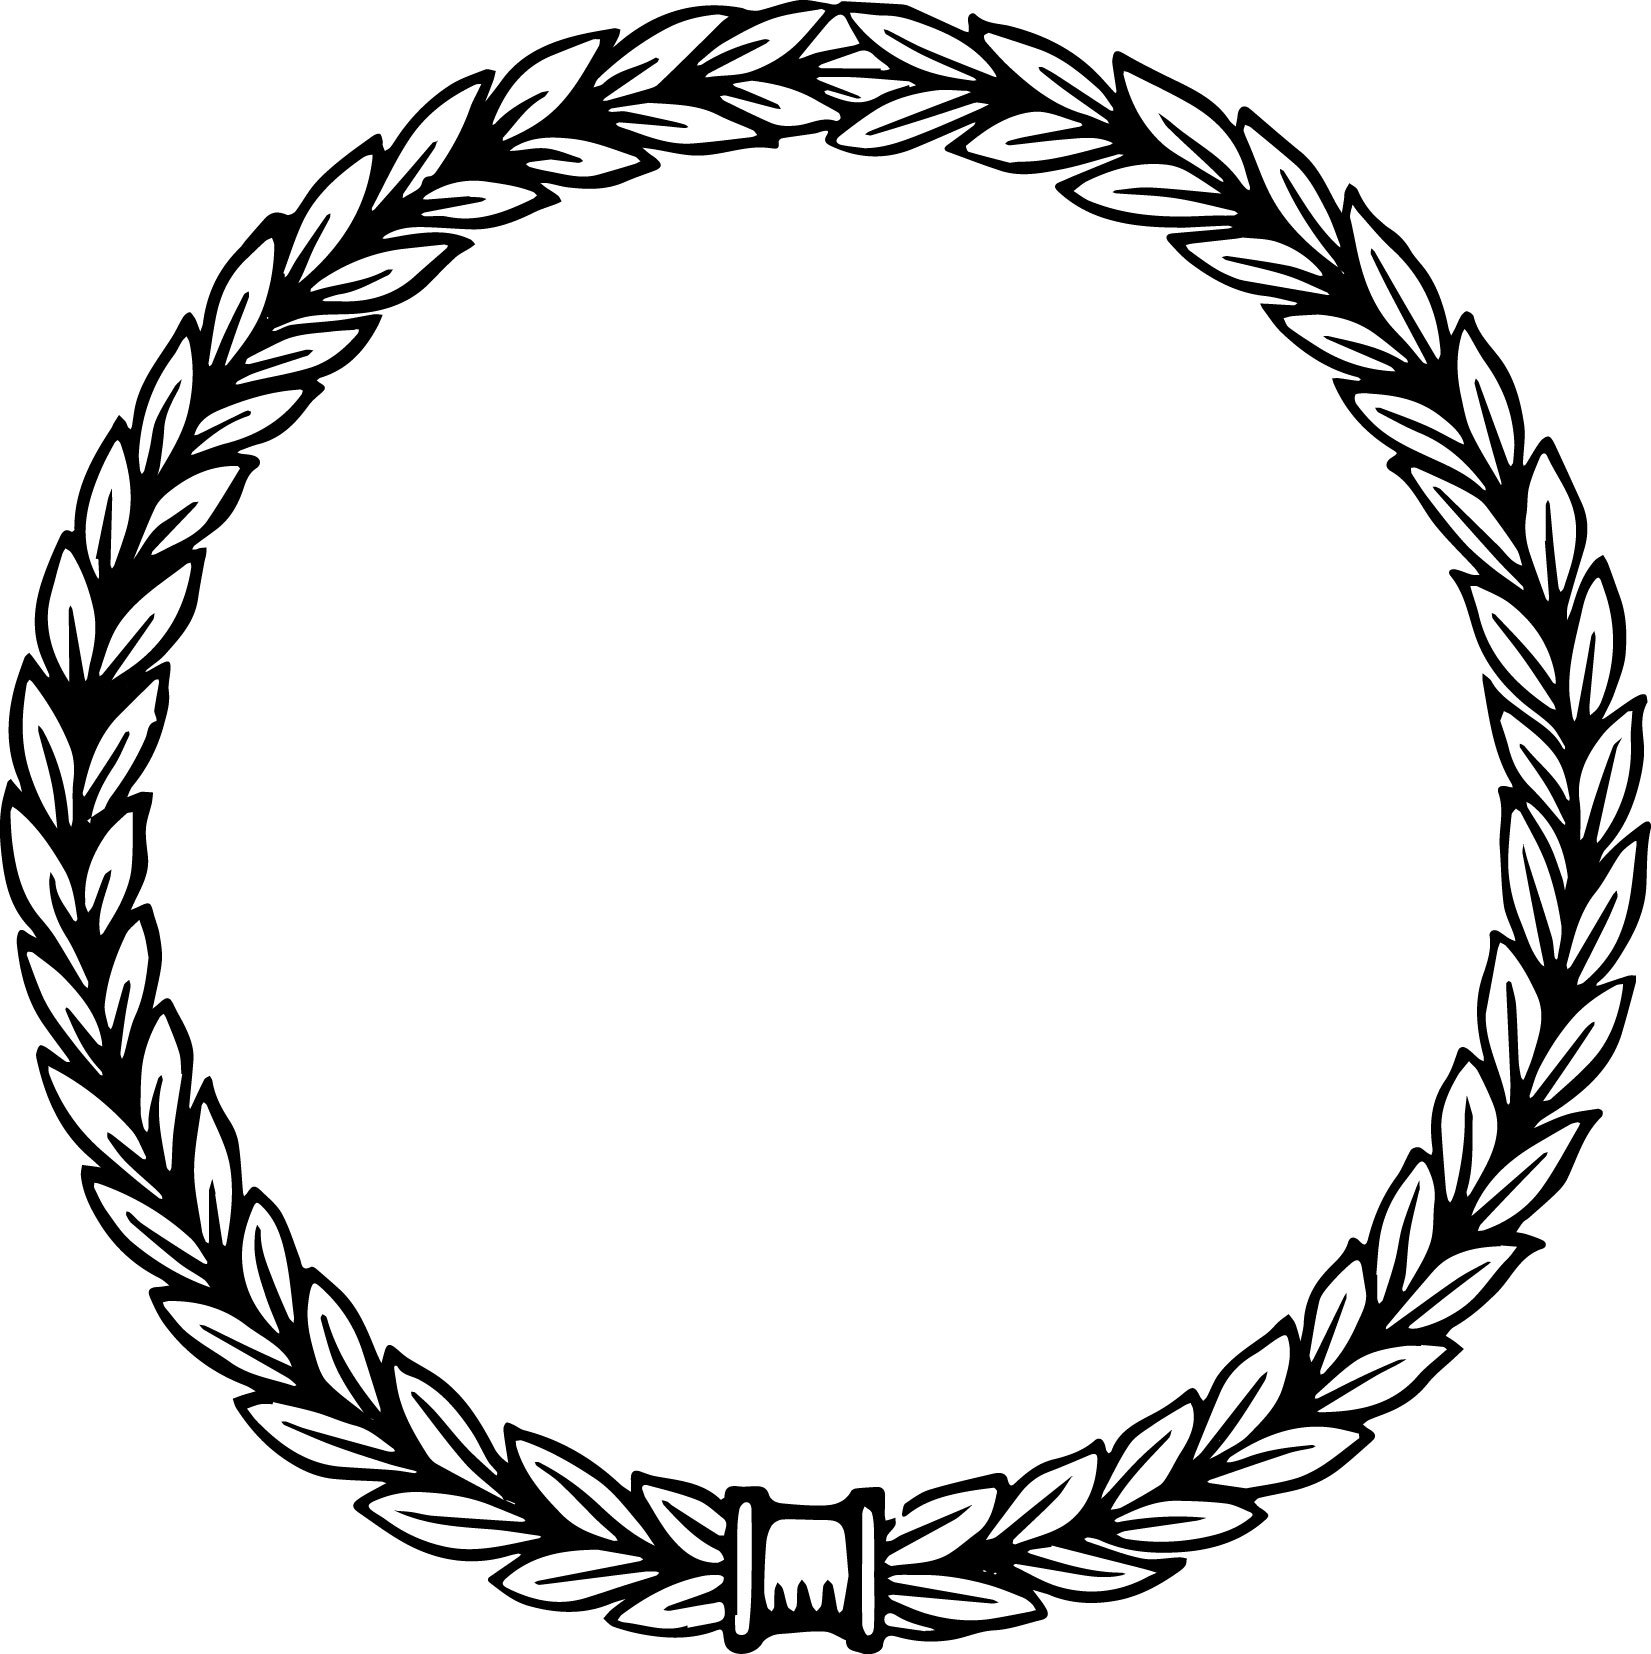 Laurel Wreath Images Clipart Free download on ClipArtMag